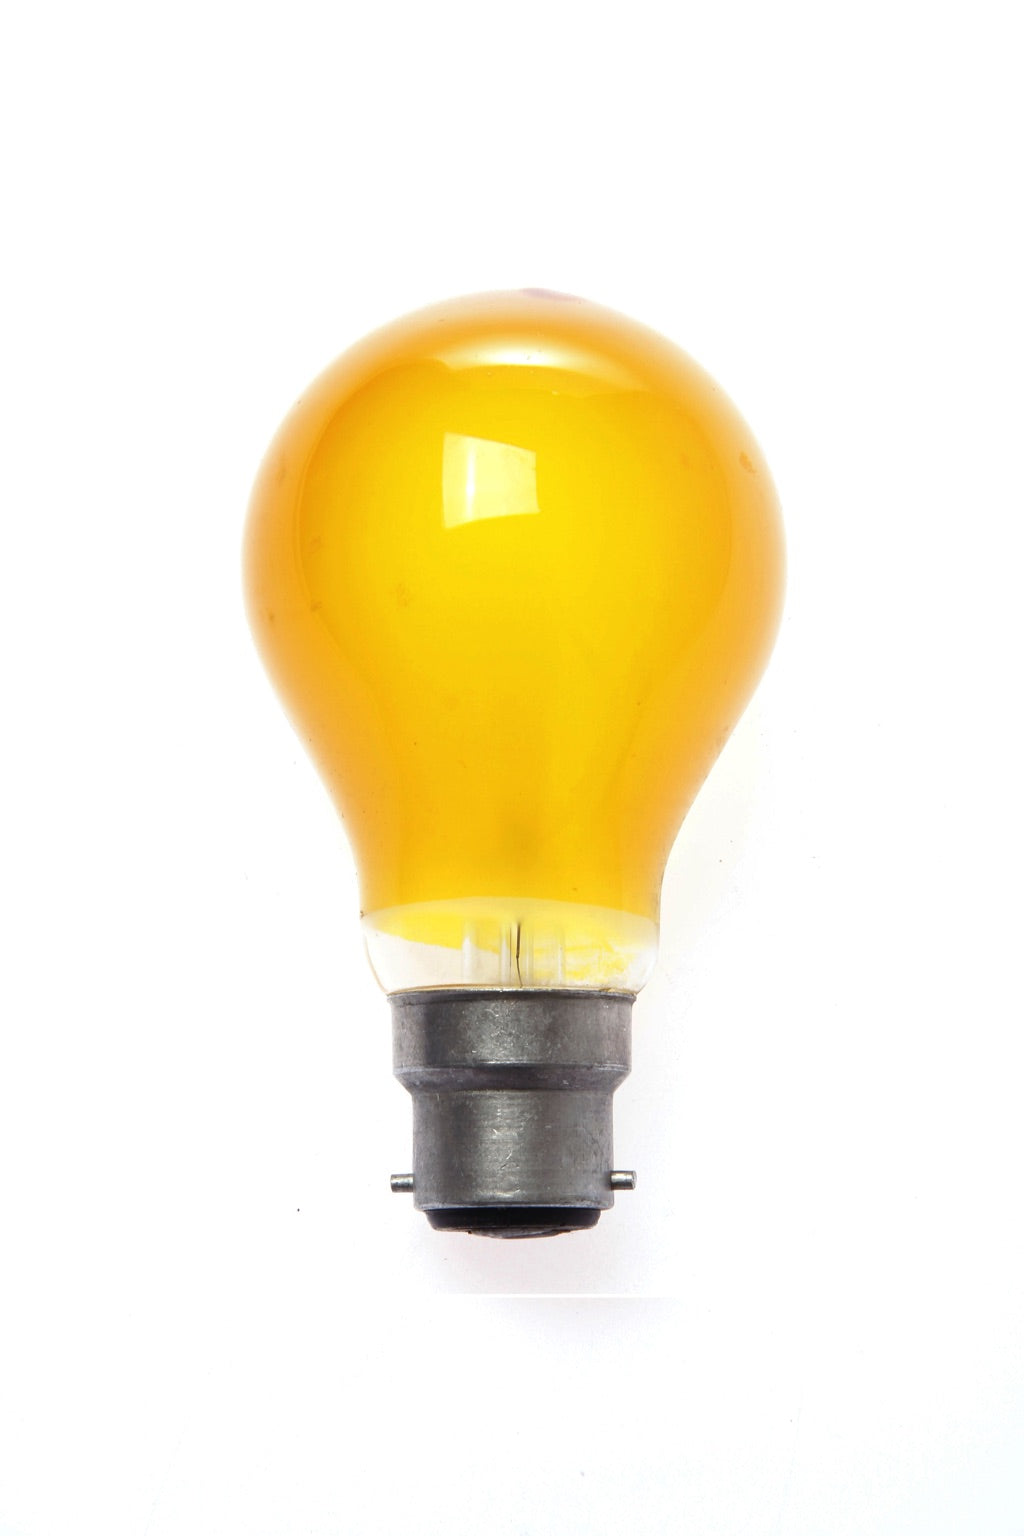 790357-LAMP COLORED B-22, 220-240V 40W YELLOW